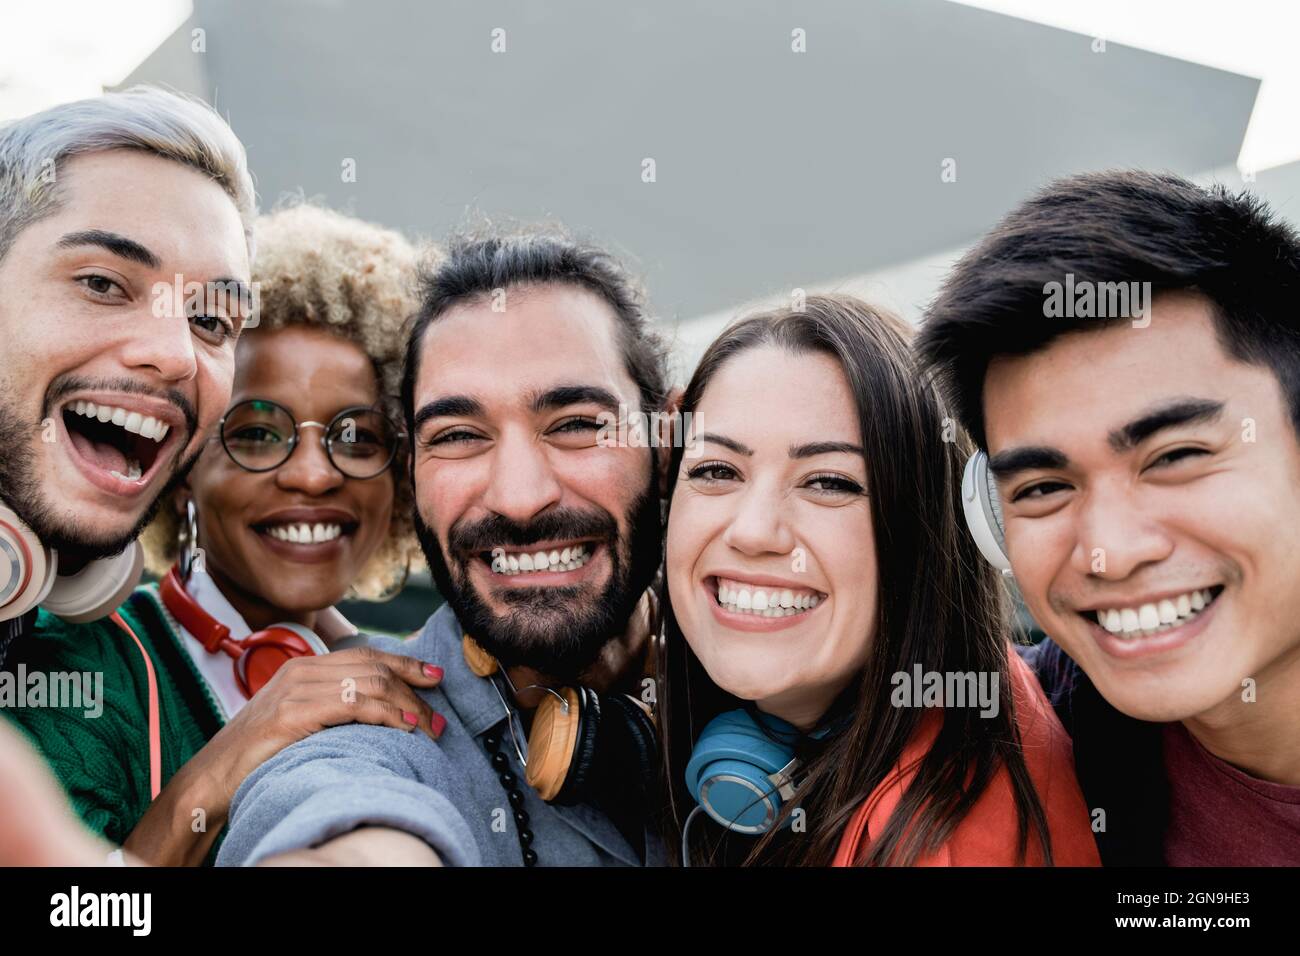 Multiracial friends having fun taking a group selfie portrait with mobile phone outdoor in the city - Focus on center girl face Stock Photo